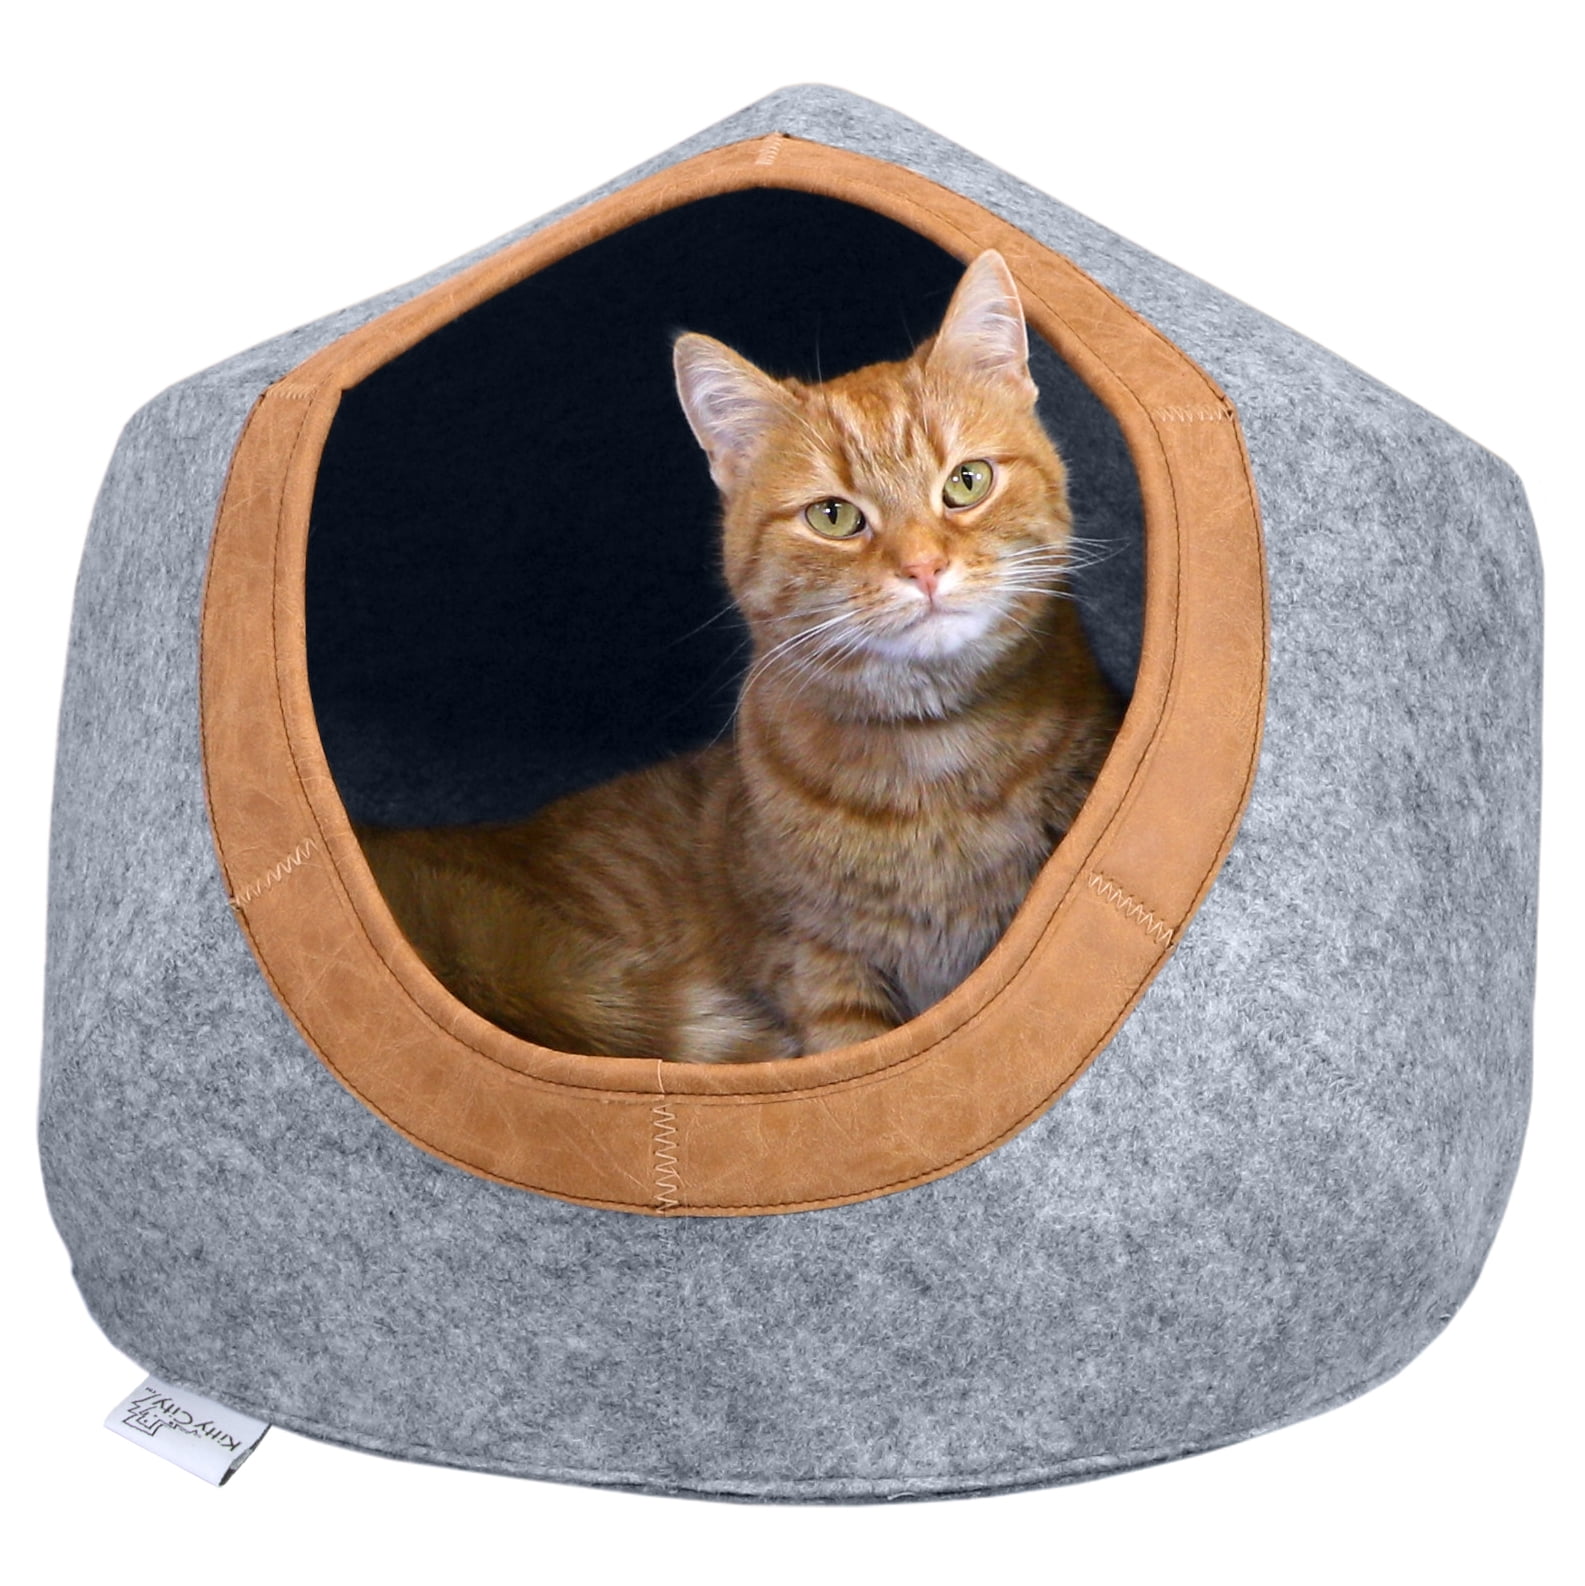 cat sleeping place for cats and small dogs cat bed Noble cat cave made of velvet sleeping place for cat